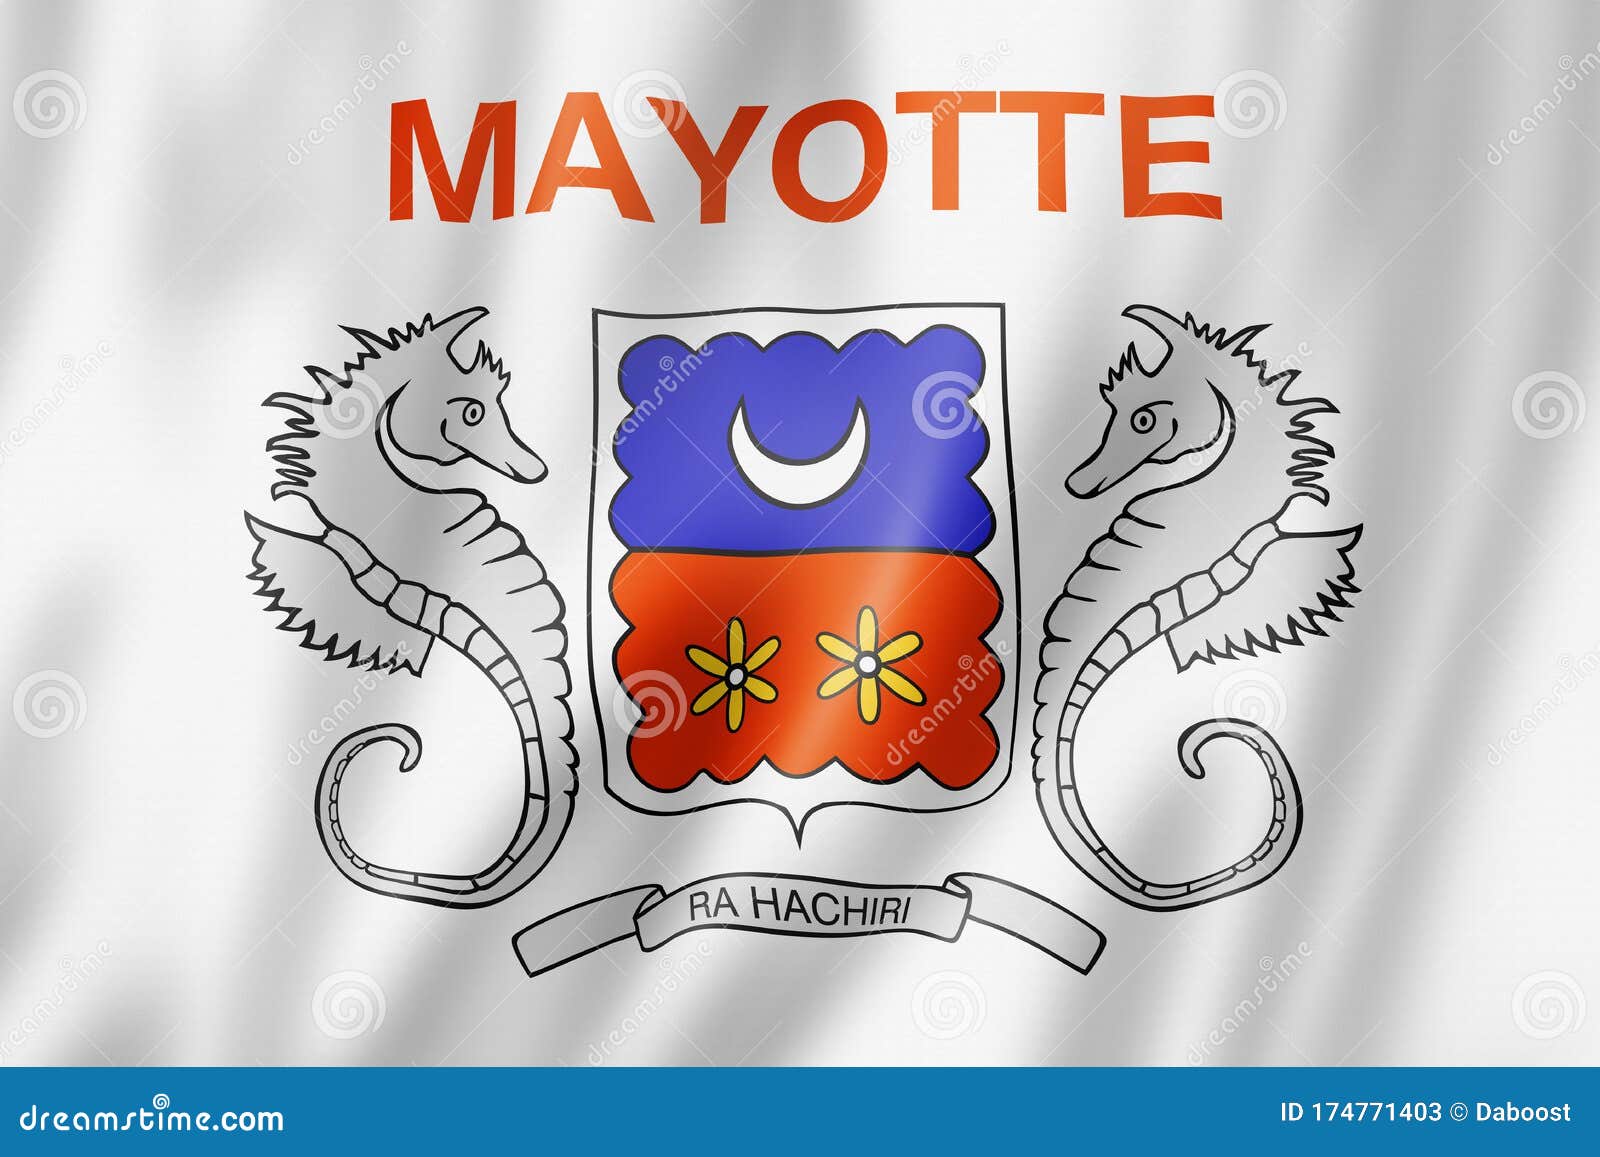 Mayotte Flag Button Icon Isolated on White Background Stock Vector